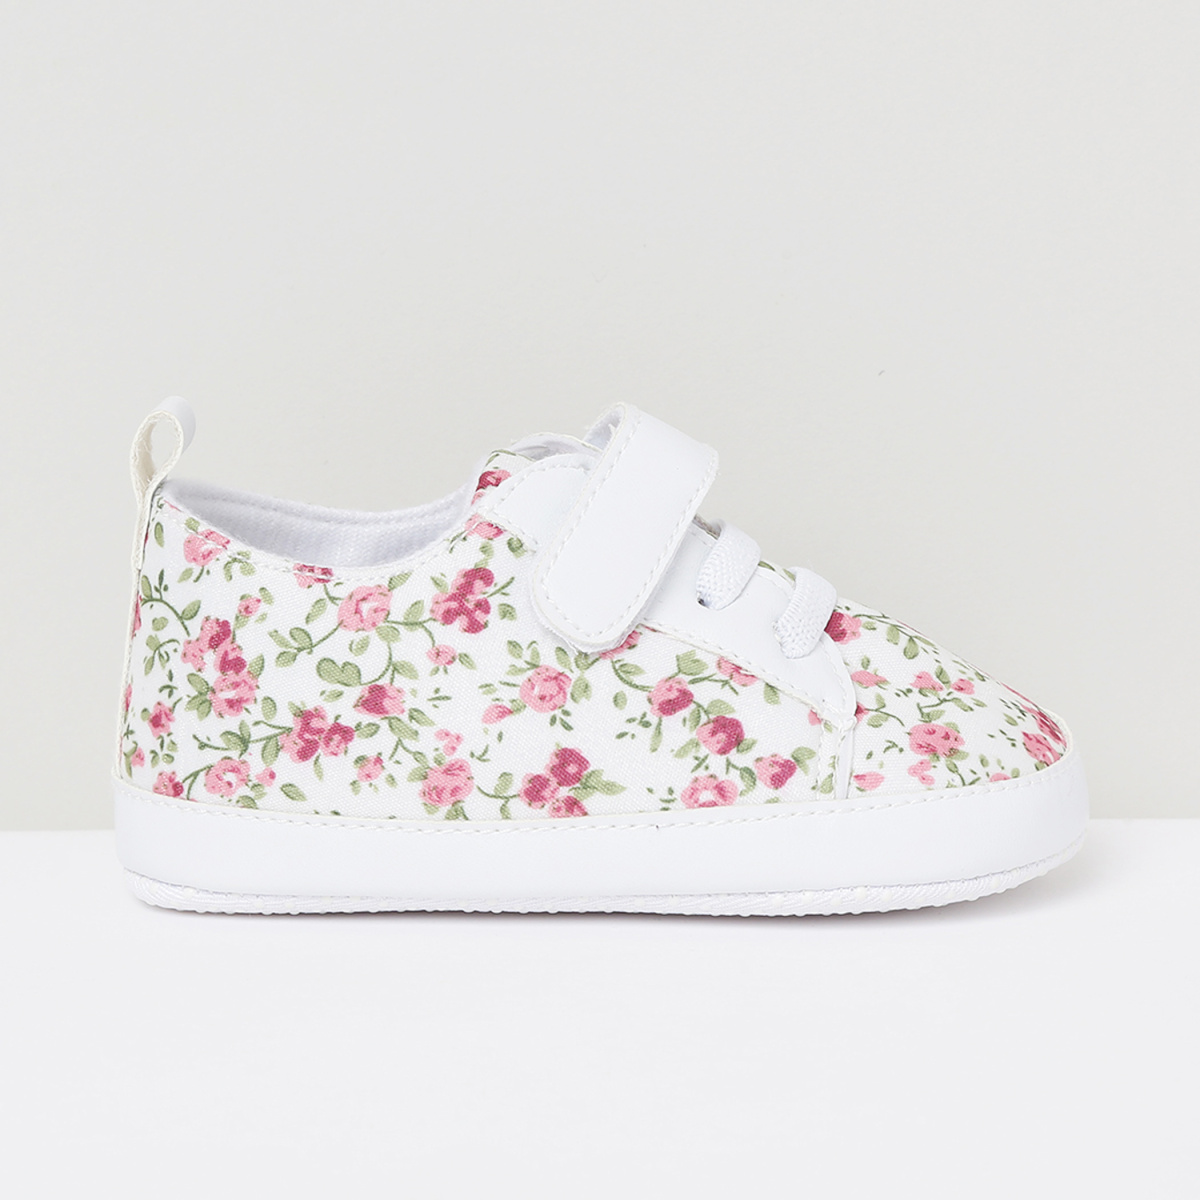 MAX Floral Print Velcro-Strap Casual Shoes